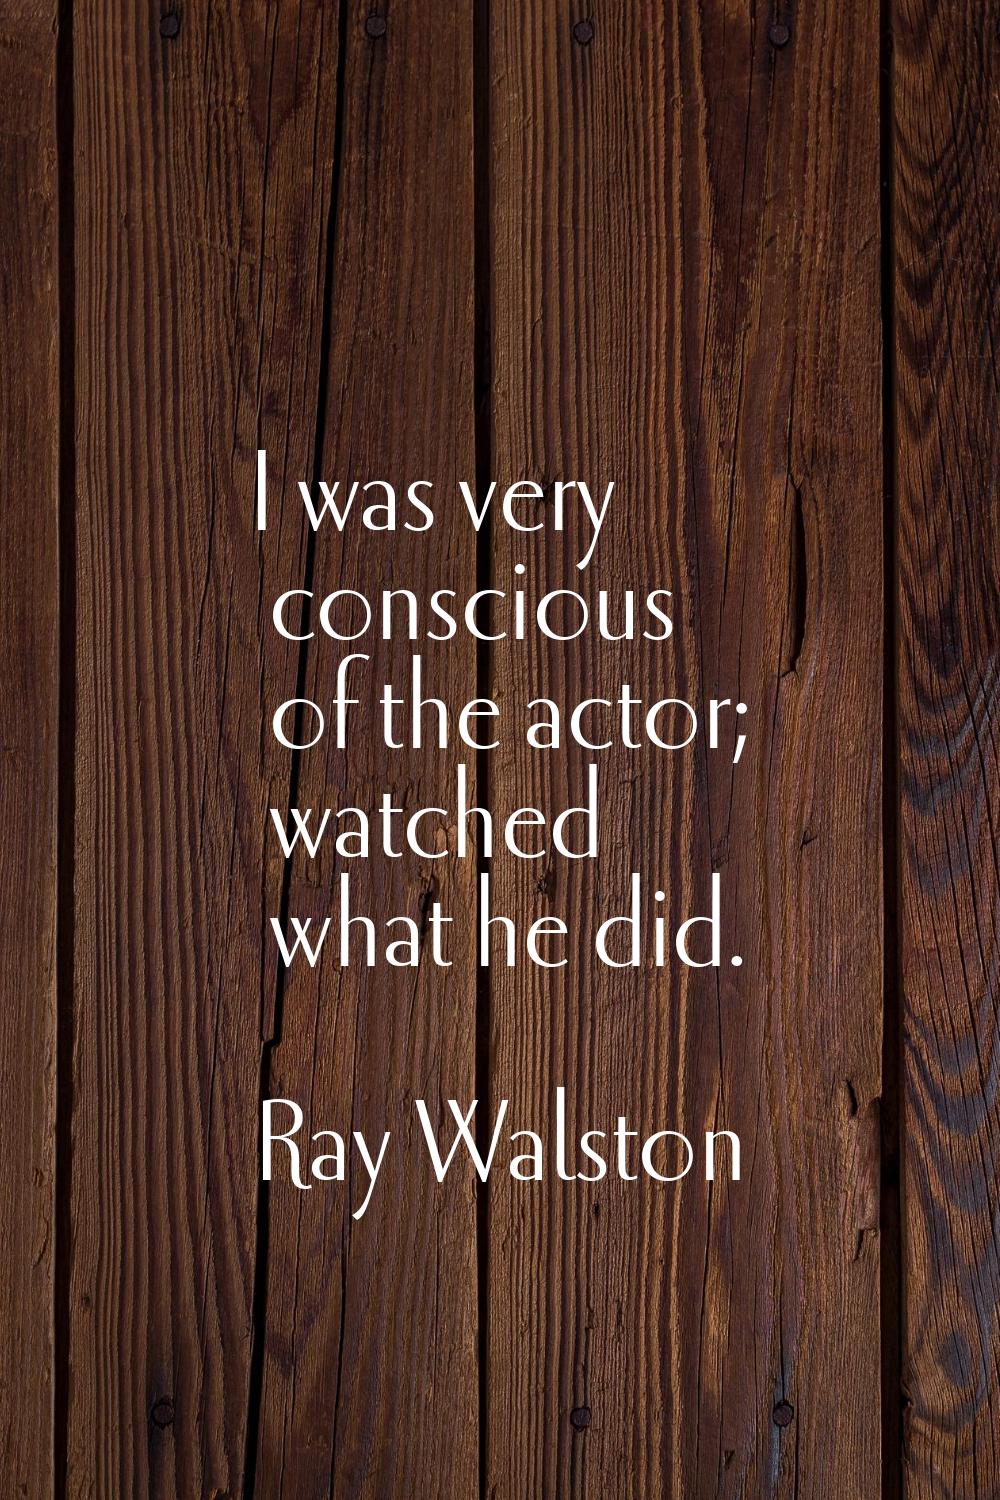 I was very conscious of the actor; watched what he did.